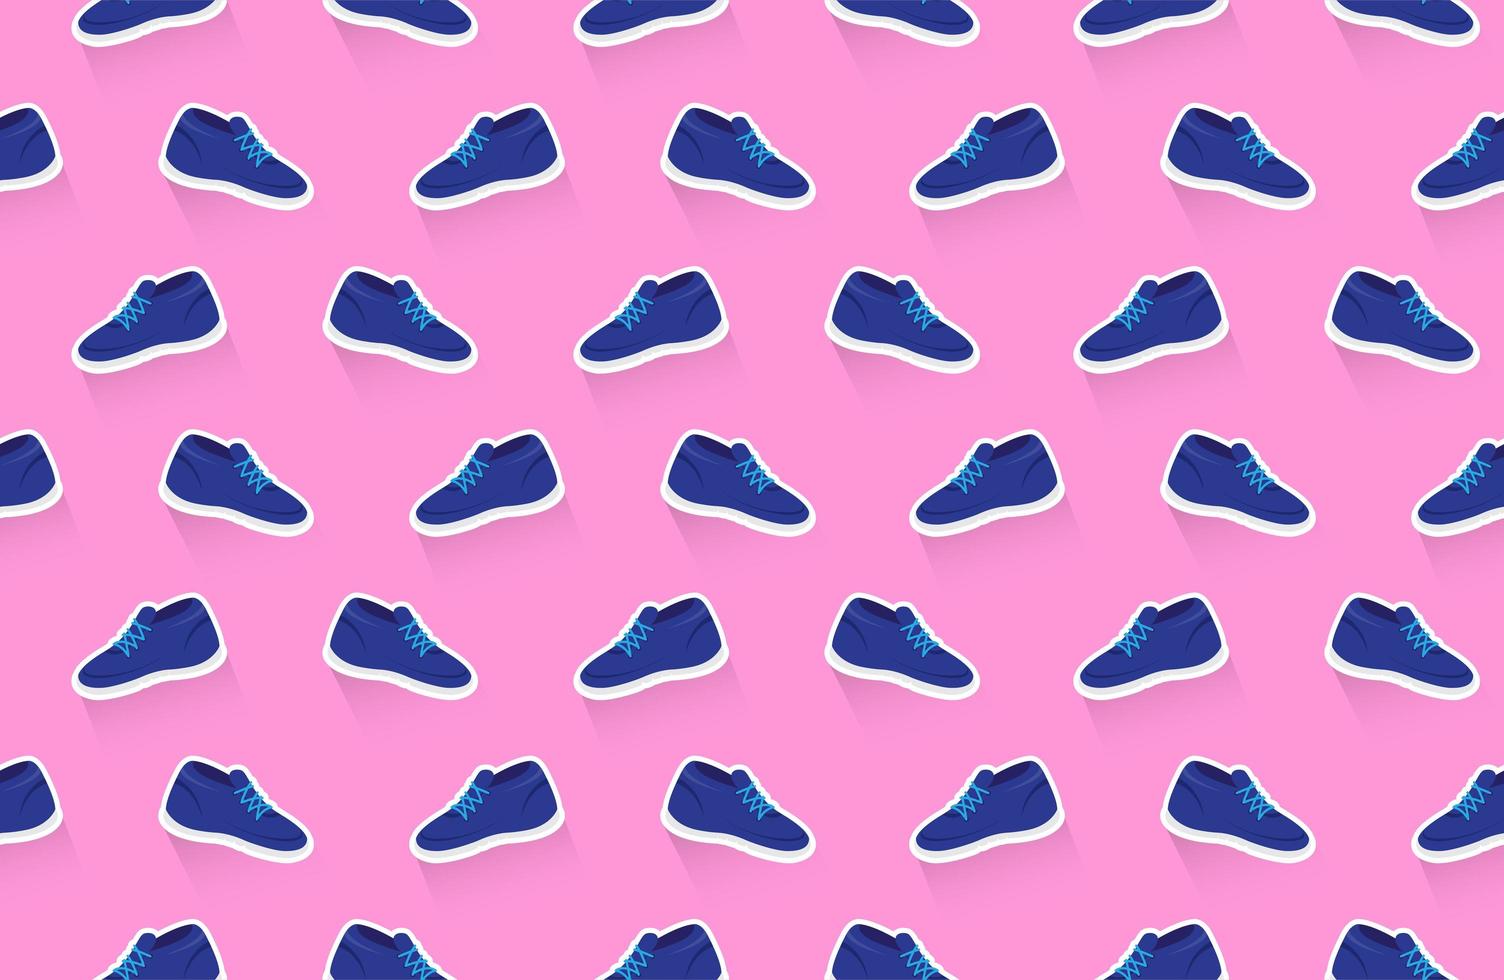 Sneakers shoes seamless pattern vector